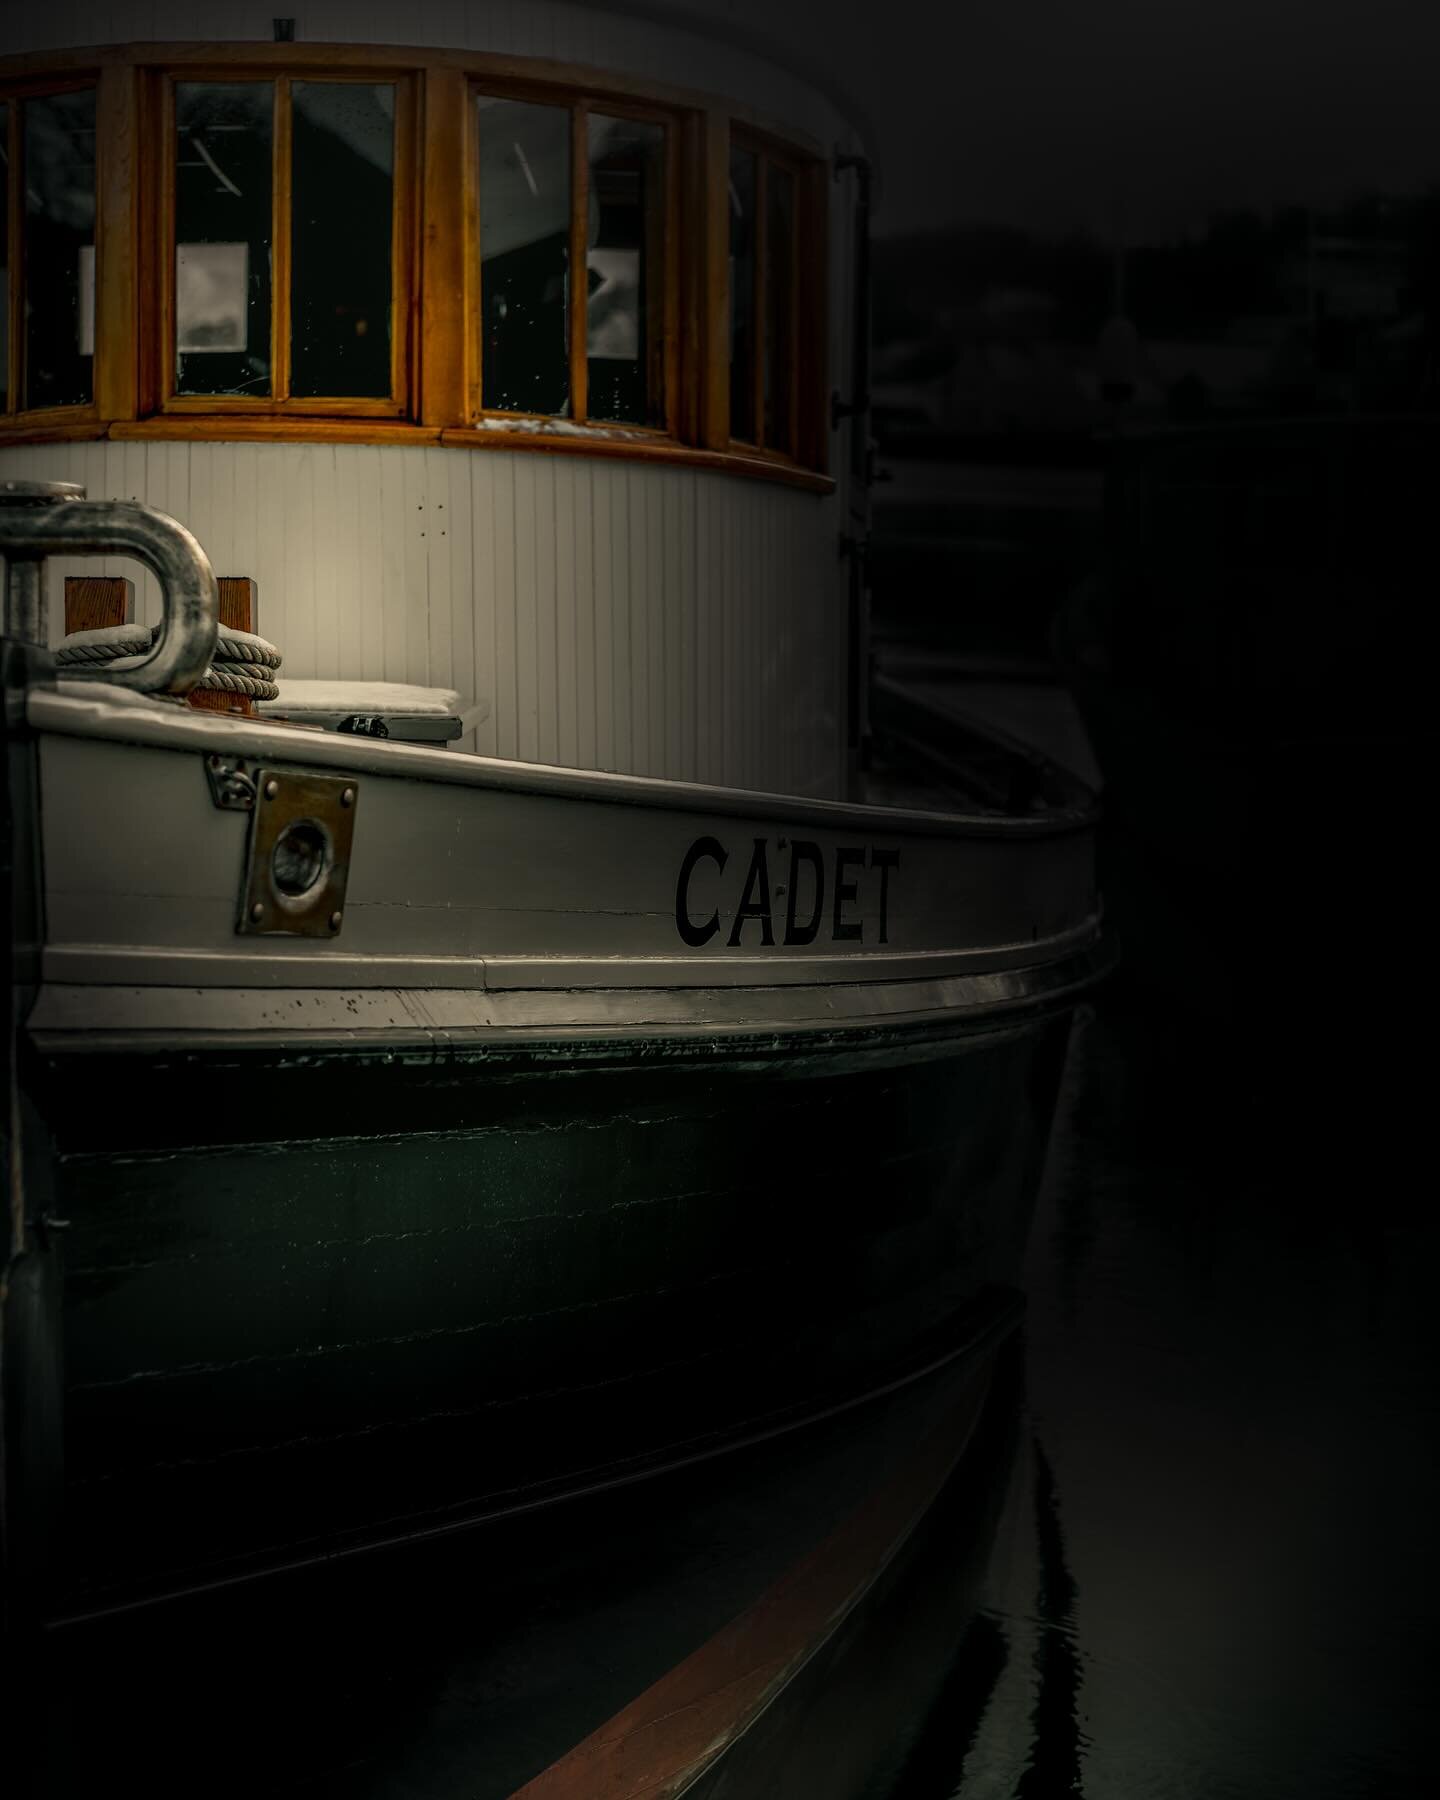 Under the moonlit sky, nestled in the serene harbor of Camden, Maine, our loyal vessel rests after a day&rsquo;s journey across the whispering waves. The gentle hum of the night, a testament to the day&rsquo;s hard work and the promise of the ocean&r